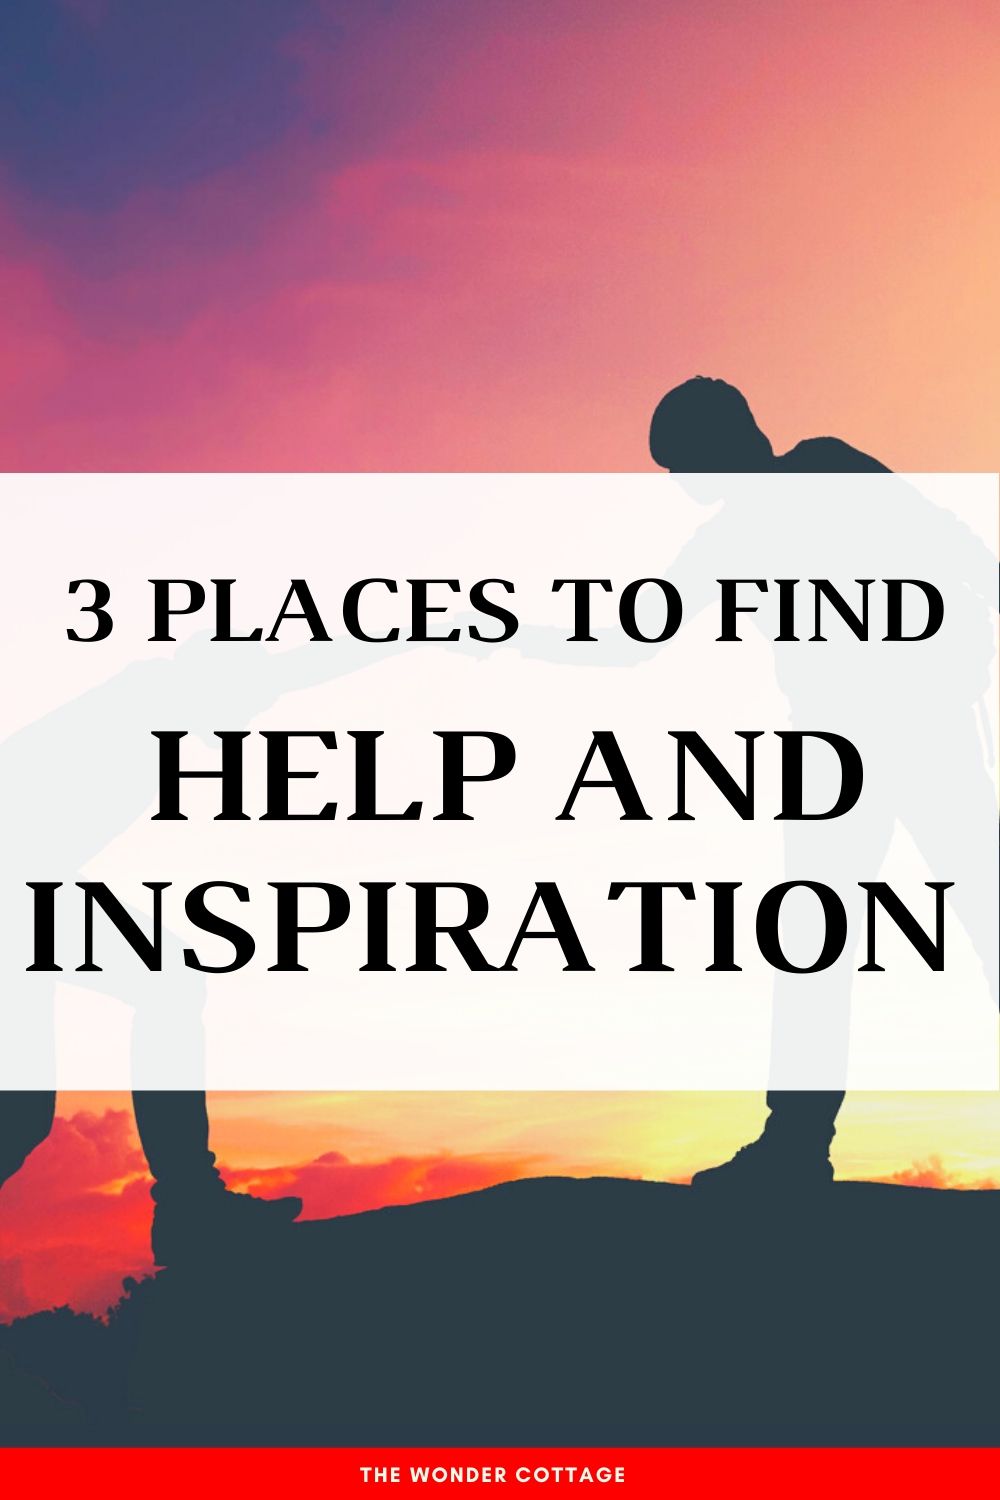 how to find help and inspiration